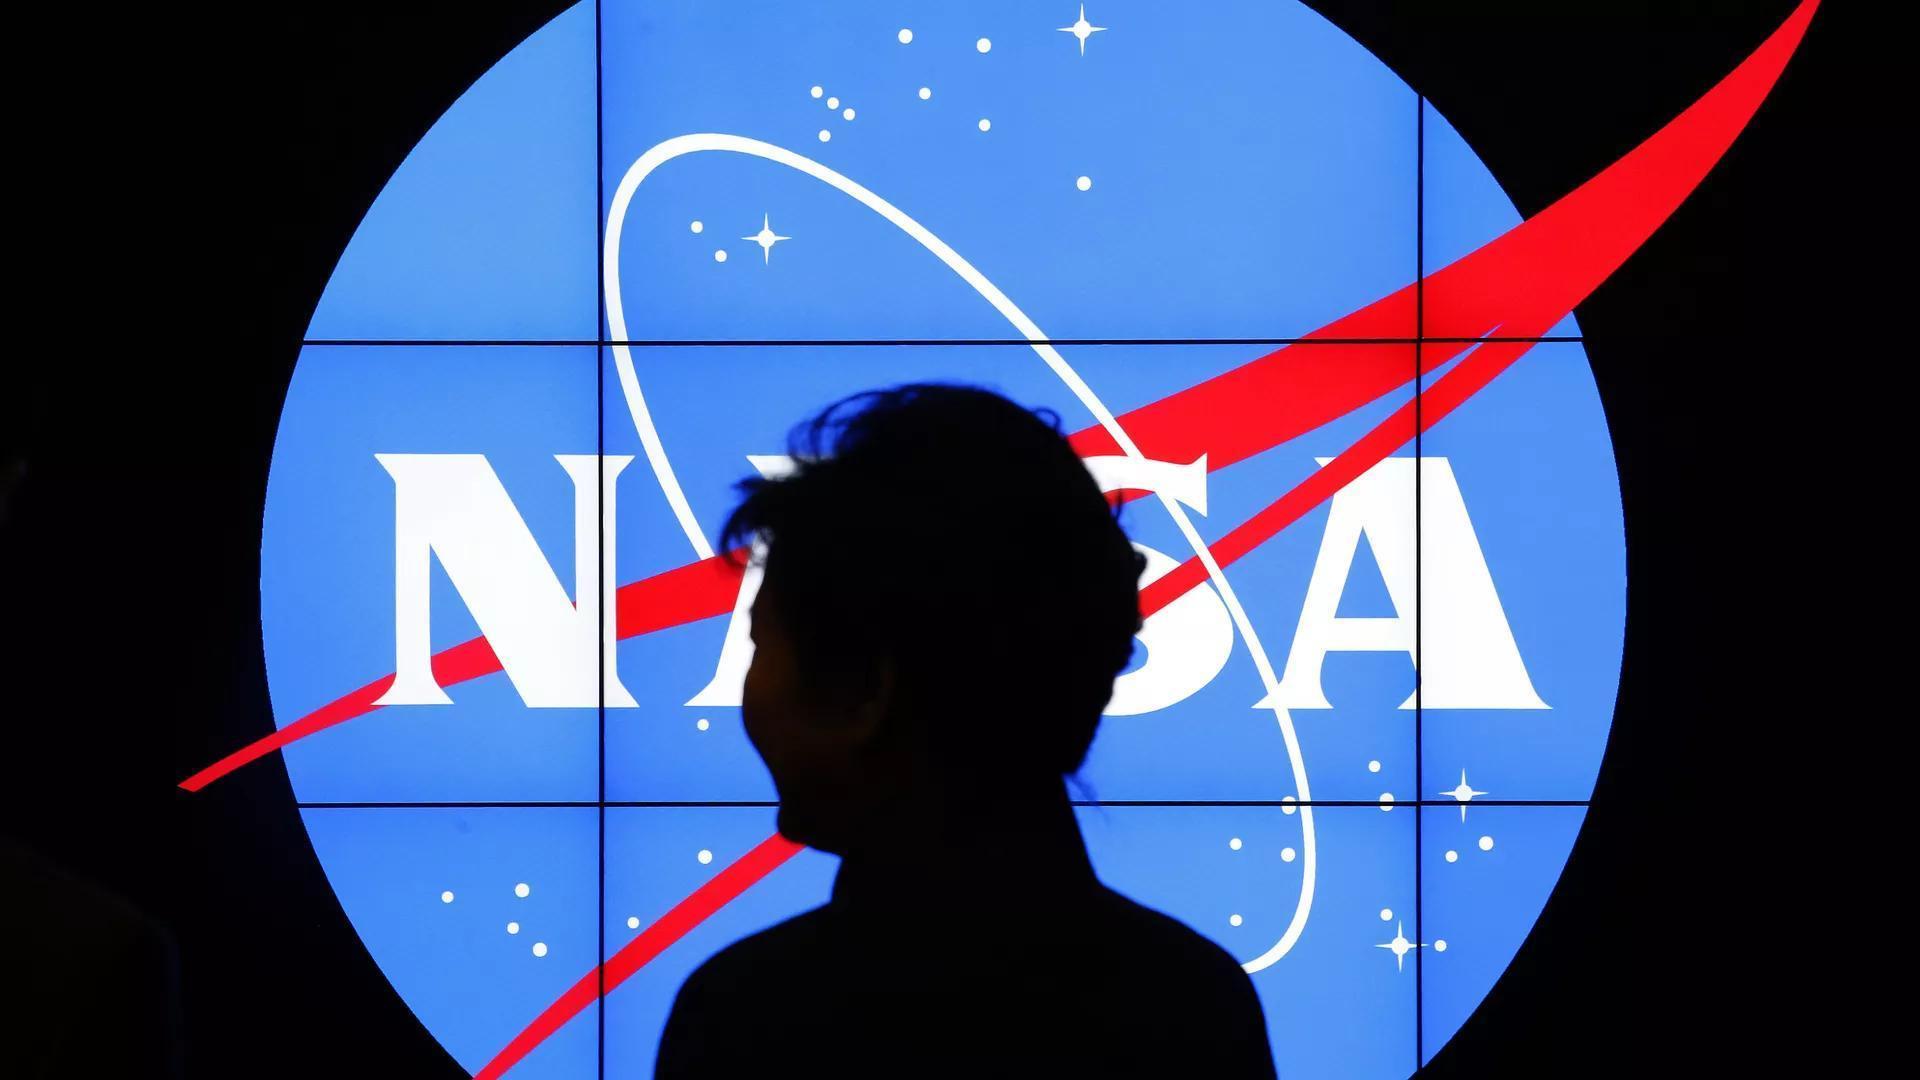 NASA Says Refining Responsibilities of New UFO Research Director Role